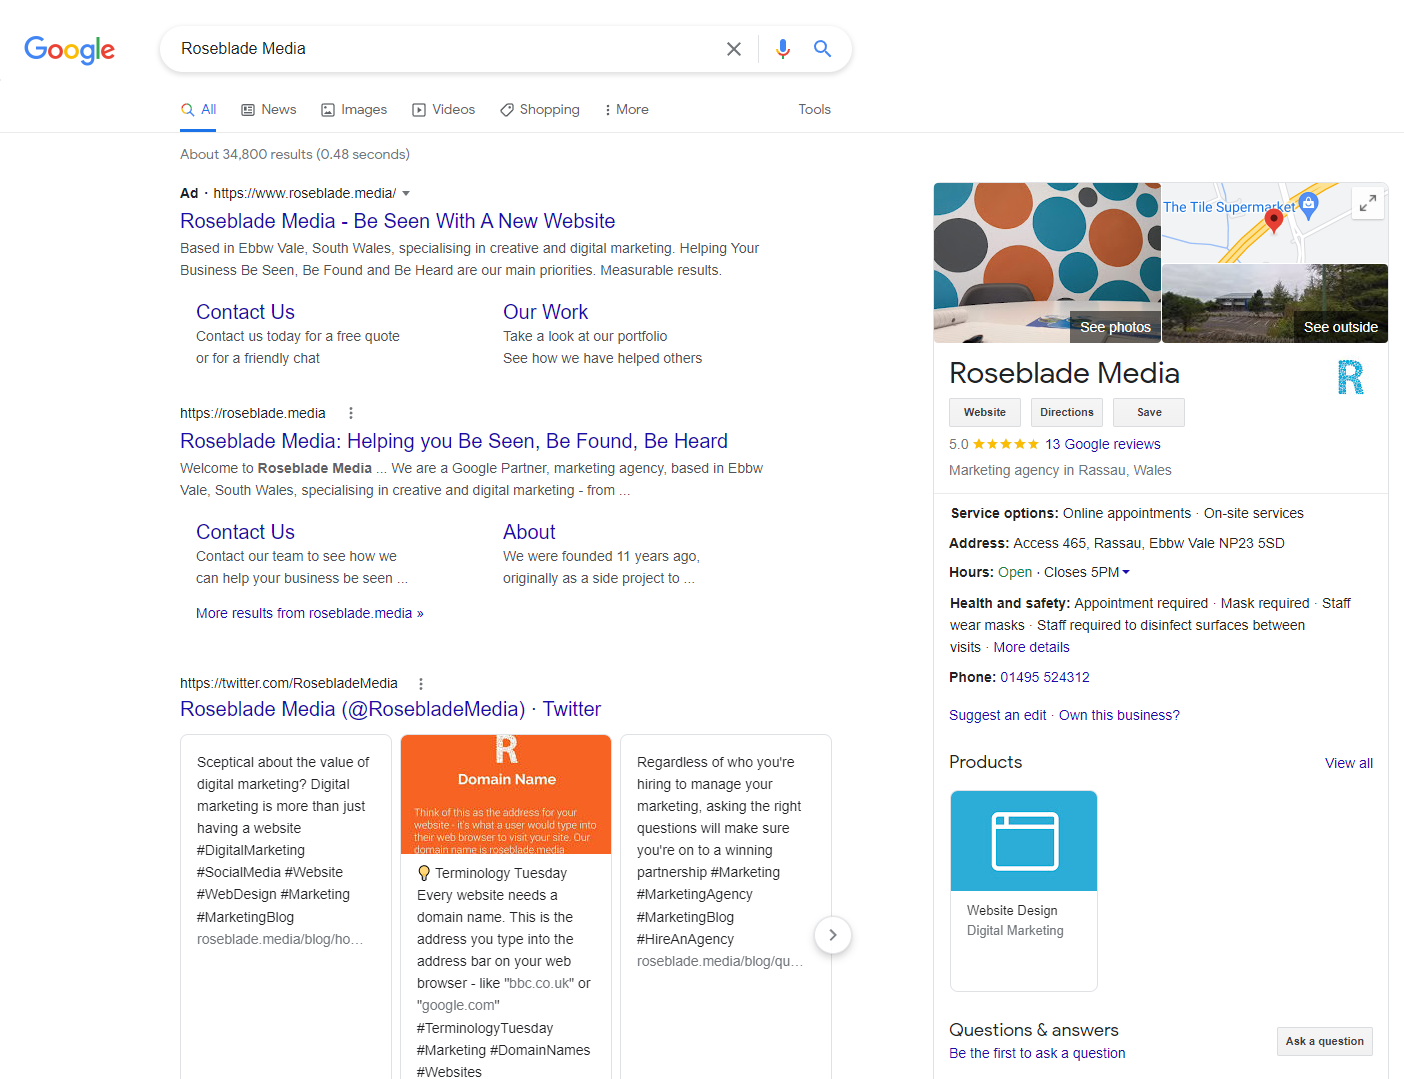 Example of Google My Business - showing Roseblade Media